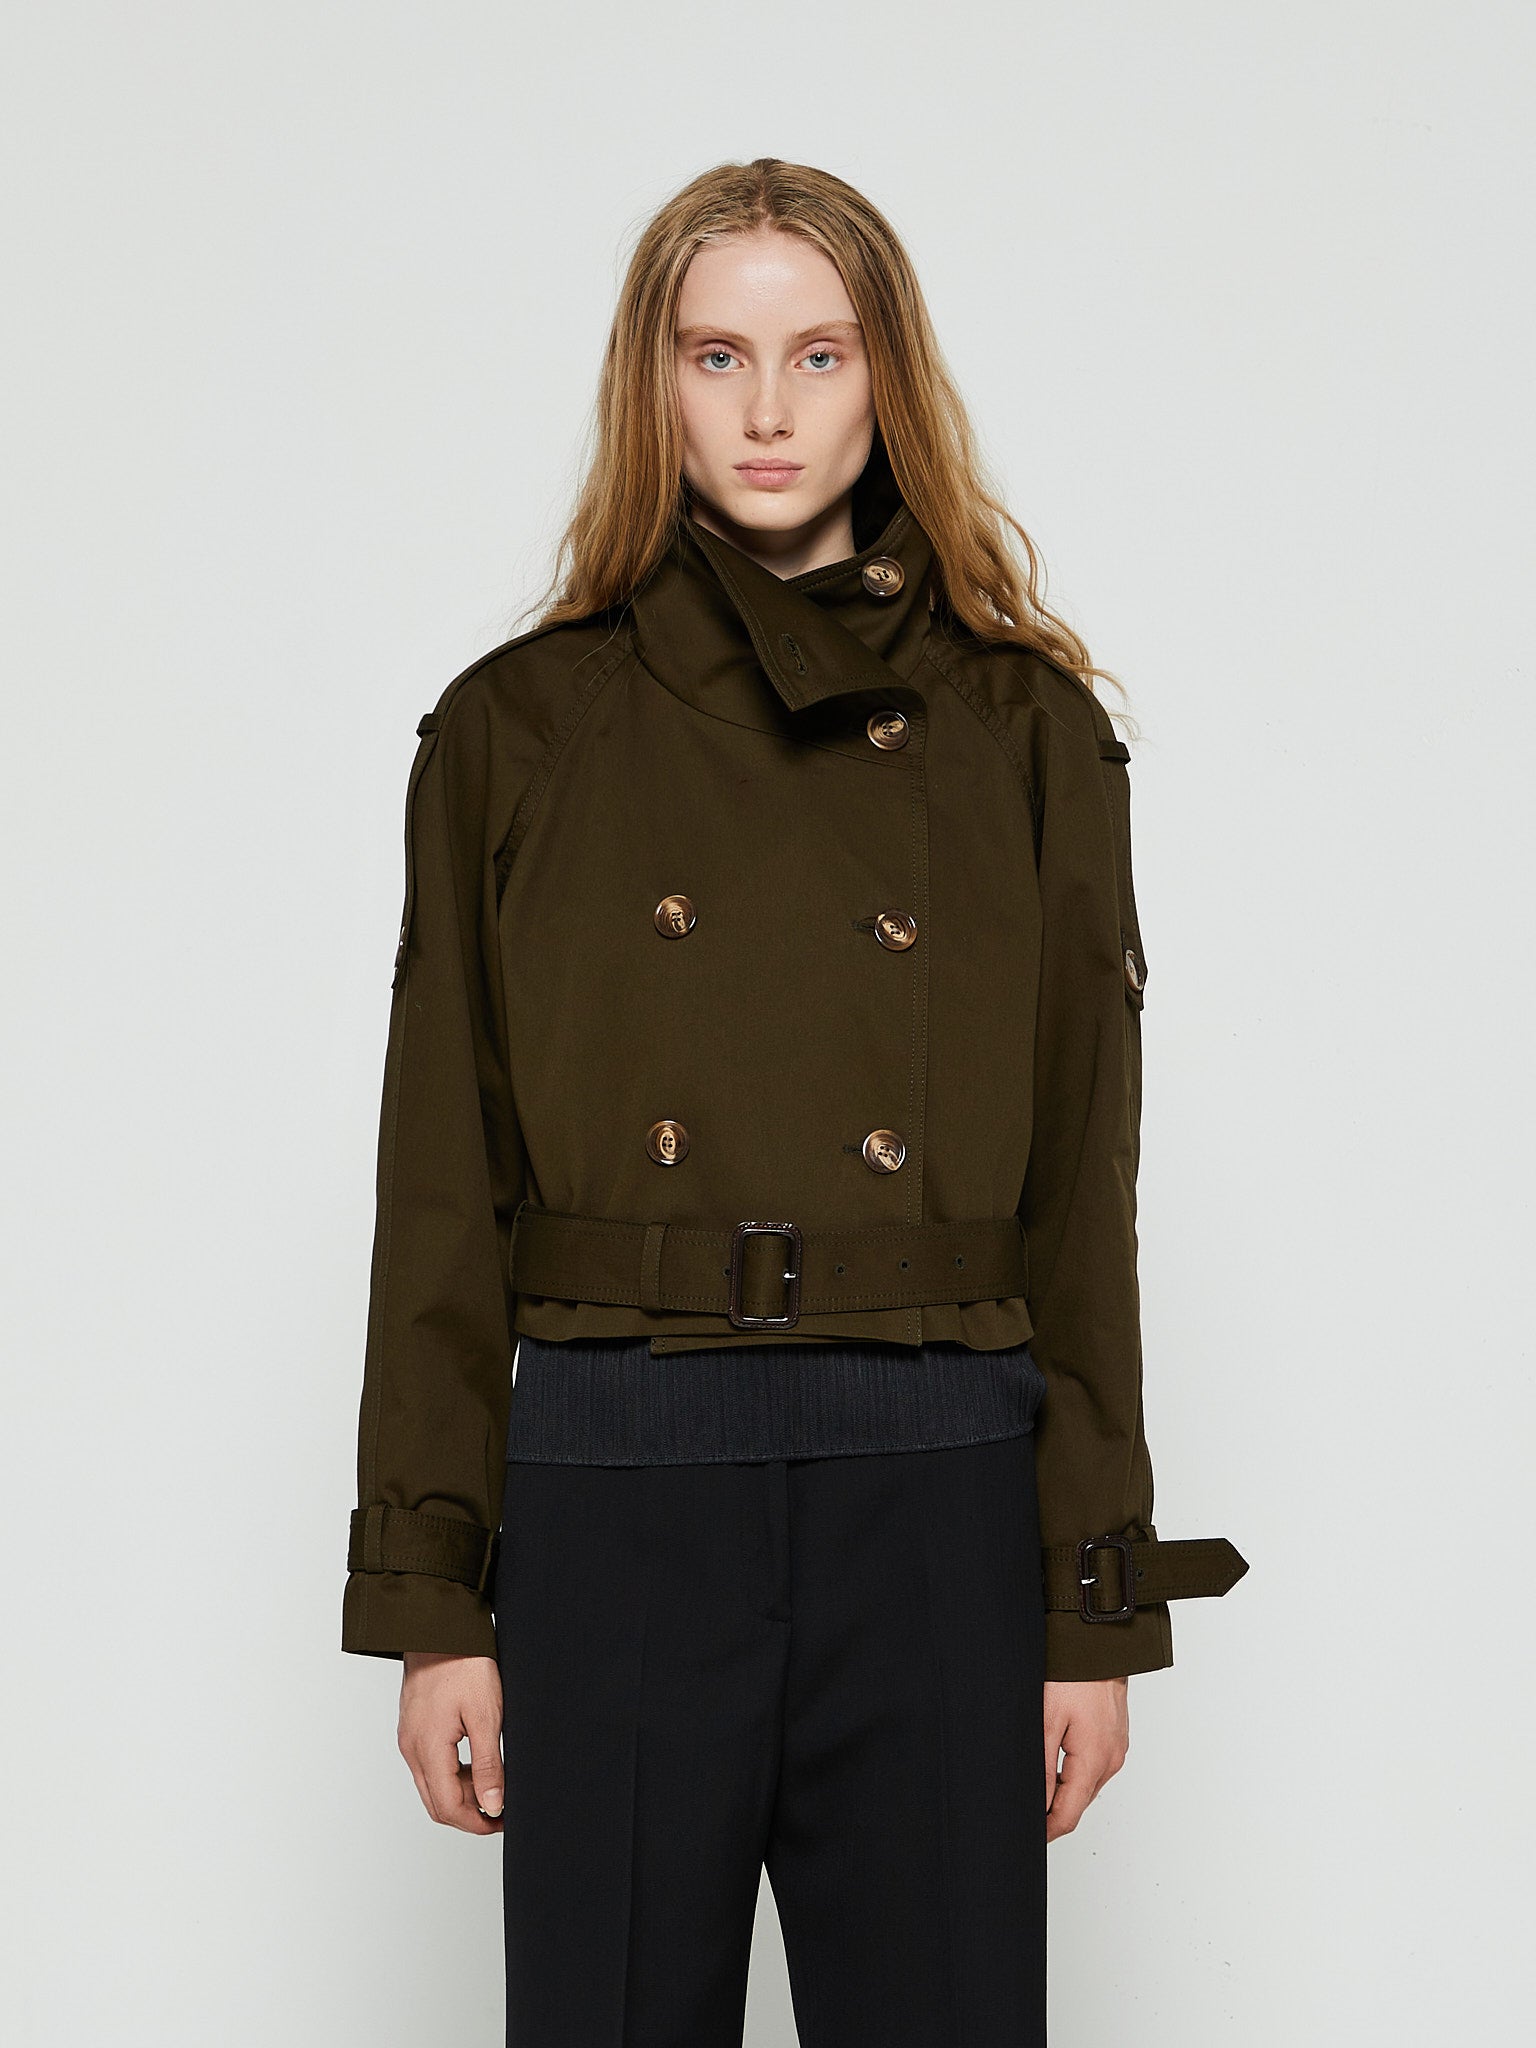 Acne Studios - Double-Breasted Trench Jacket in Military Green